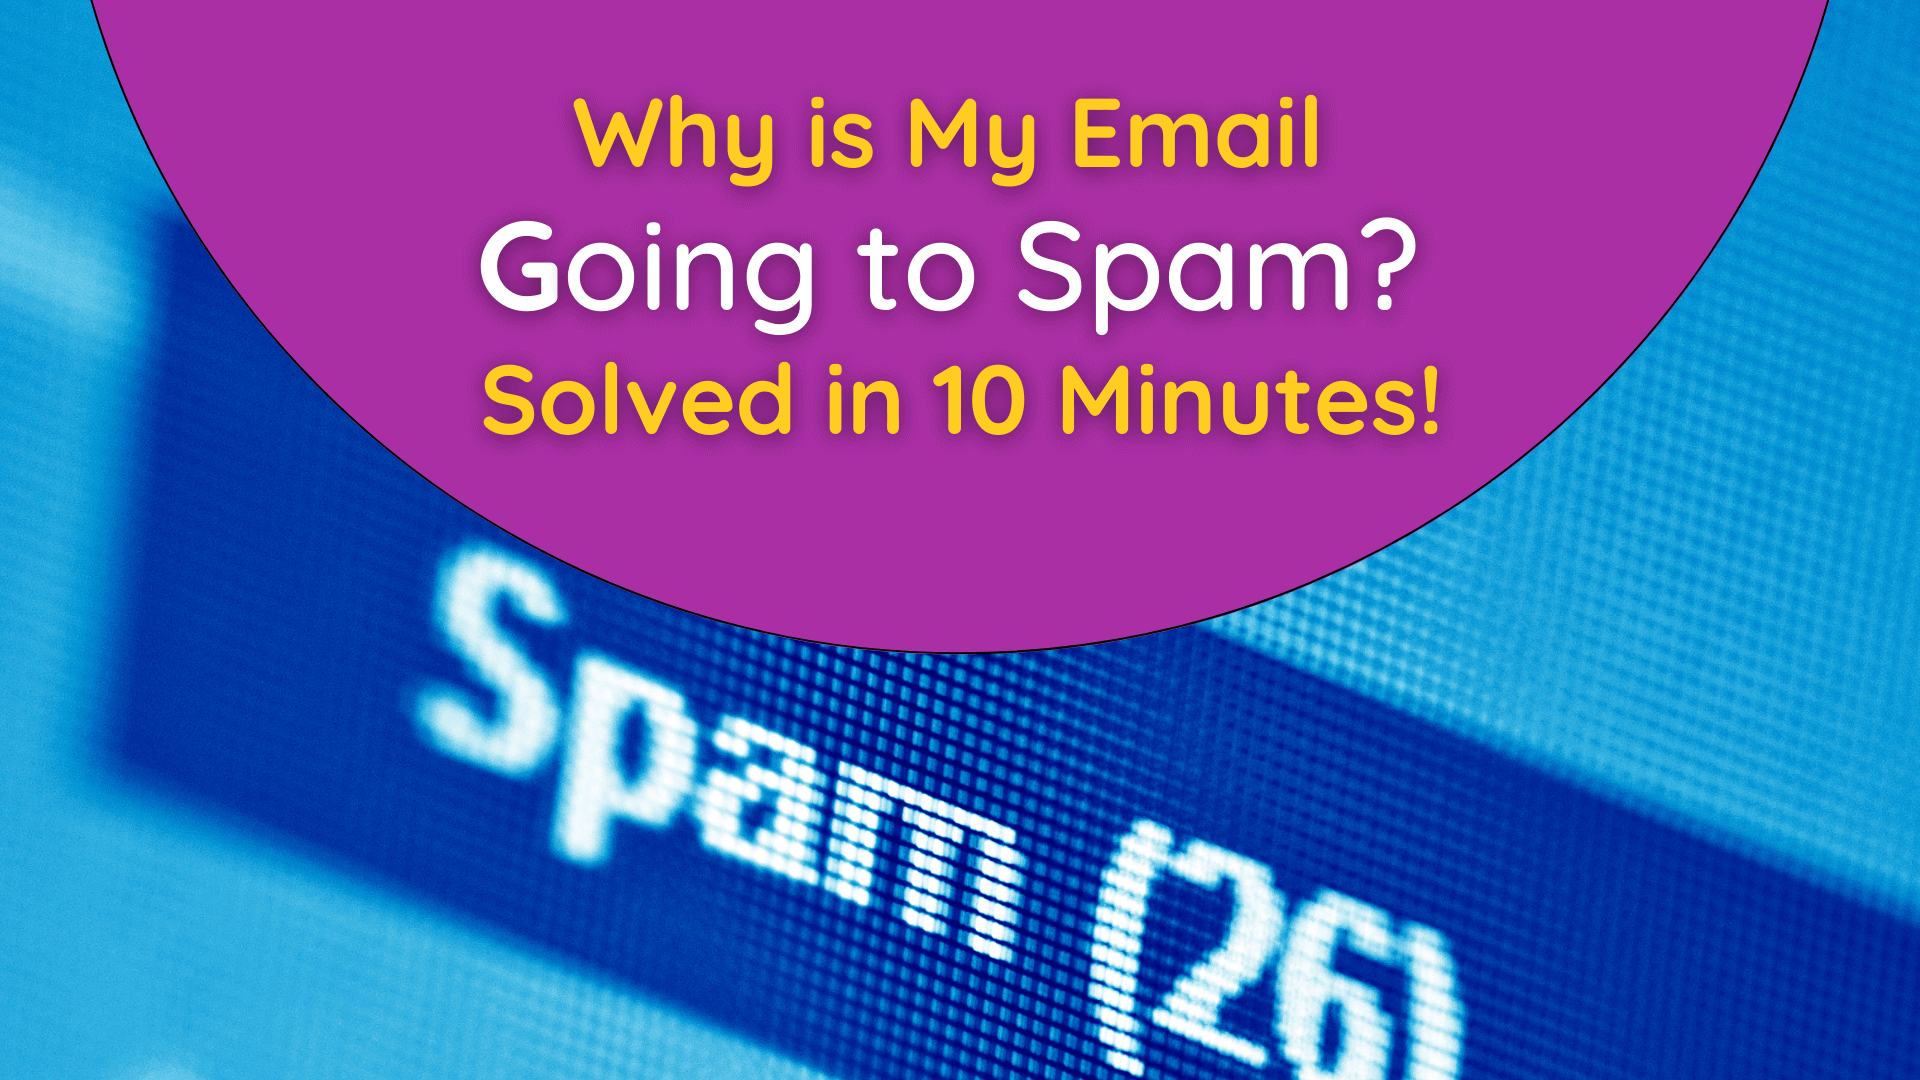 email going to spam